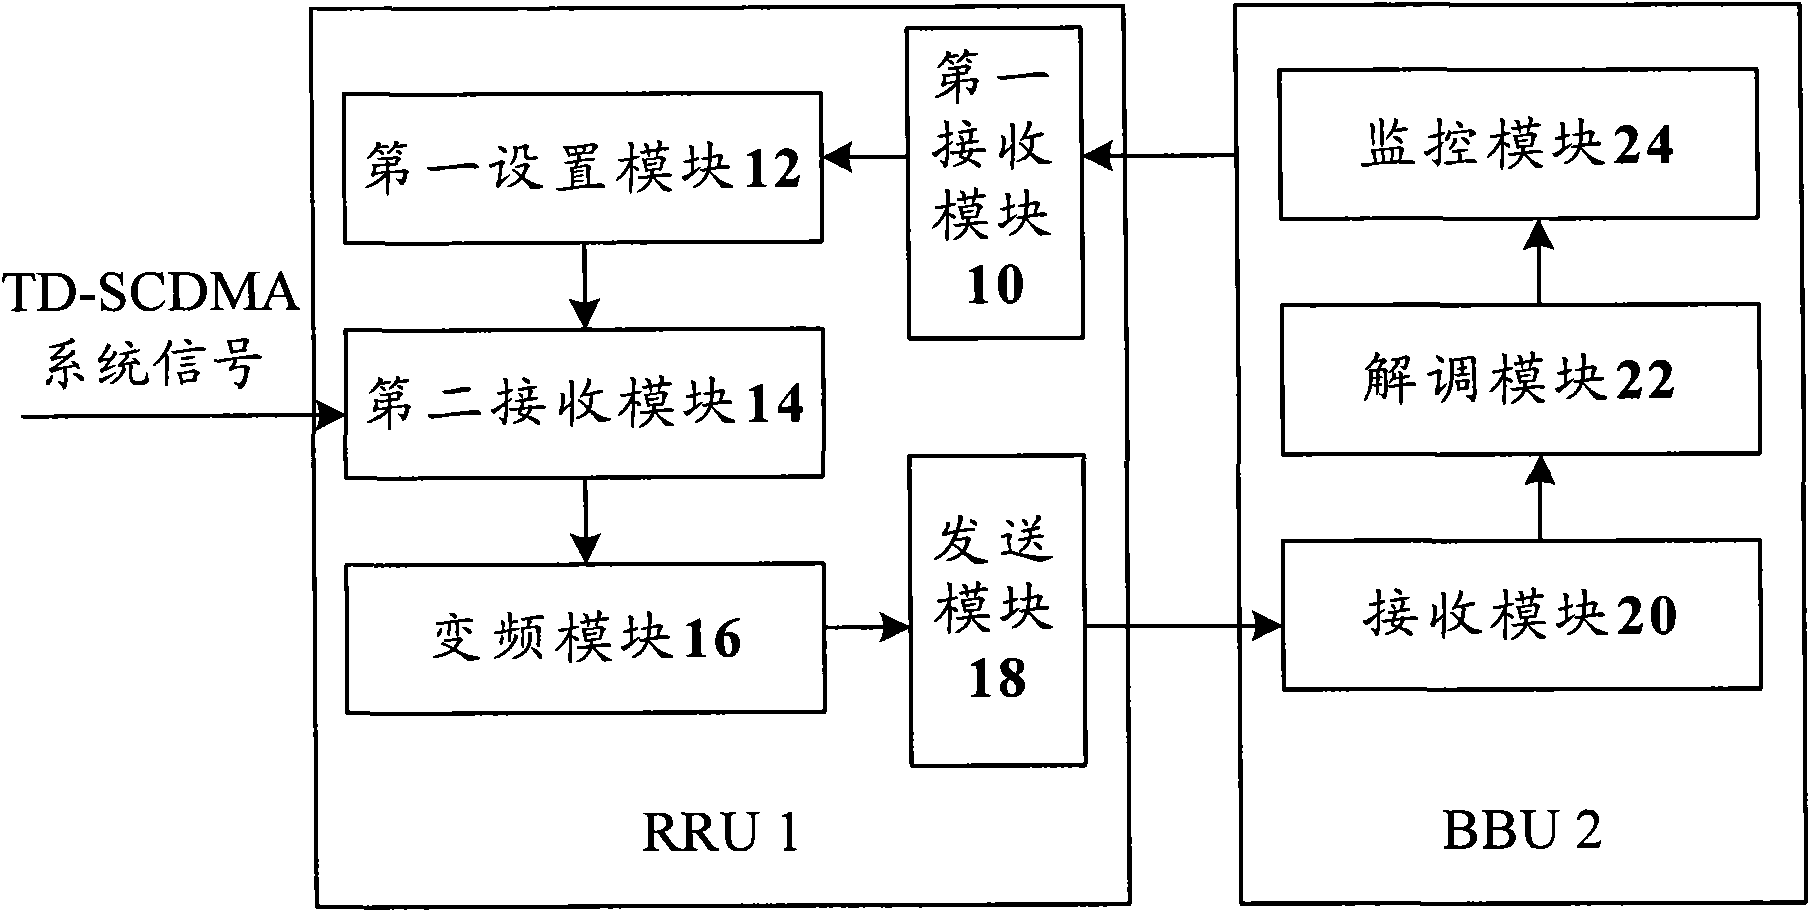 Method and system for monitoring network quality